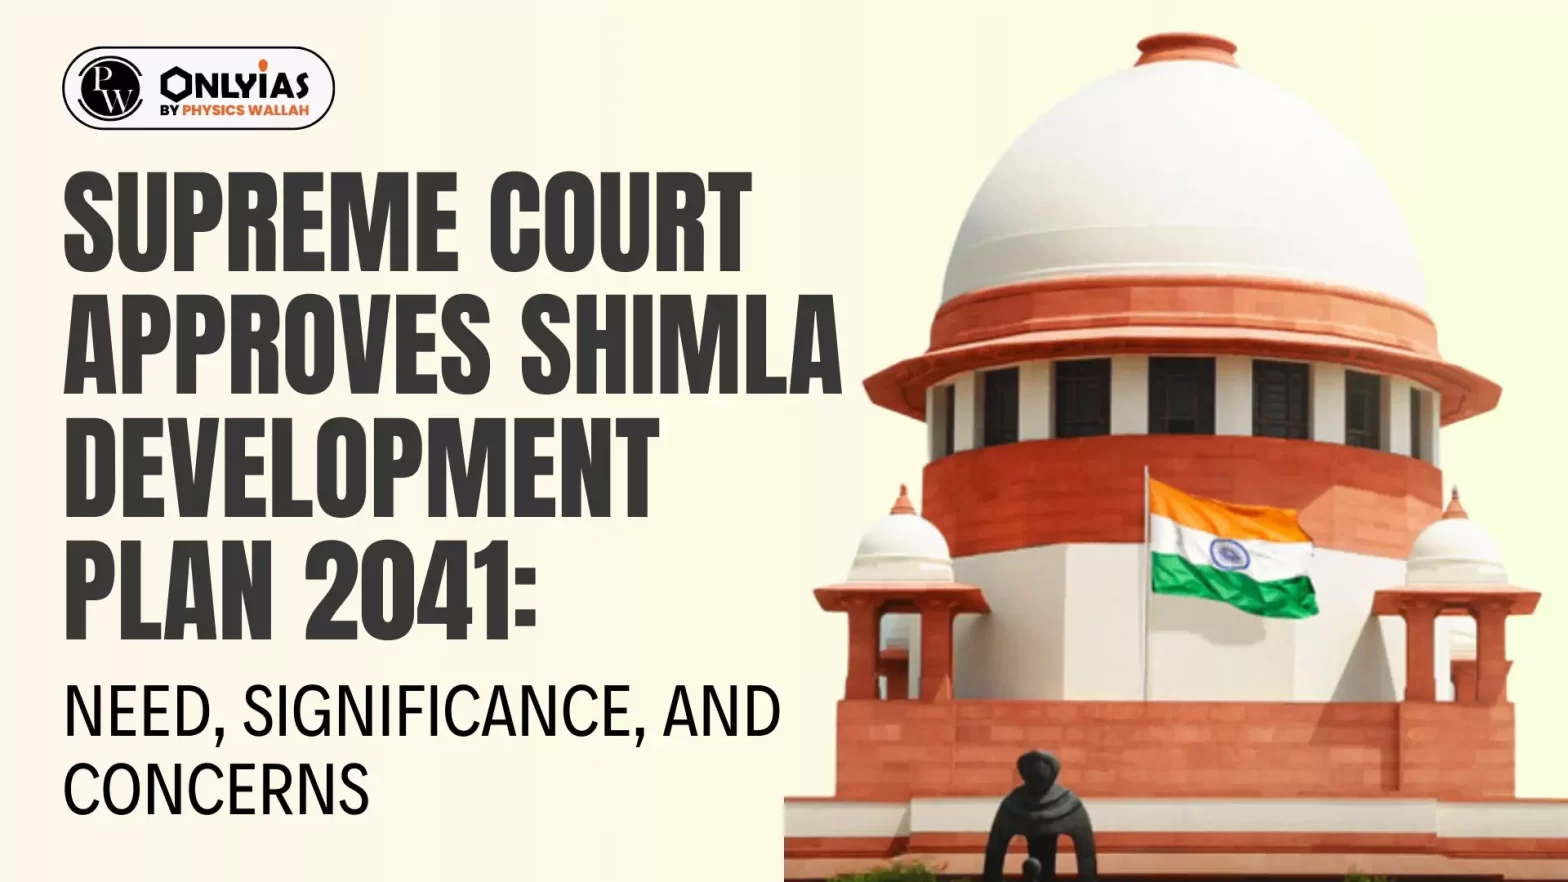 Supreme Court Approves Shimla Development Plan 2041: Need, Significance, and Concerns